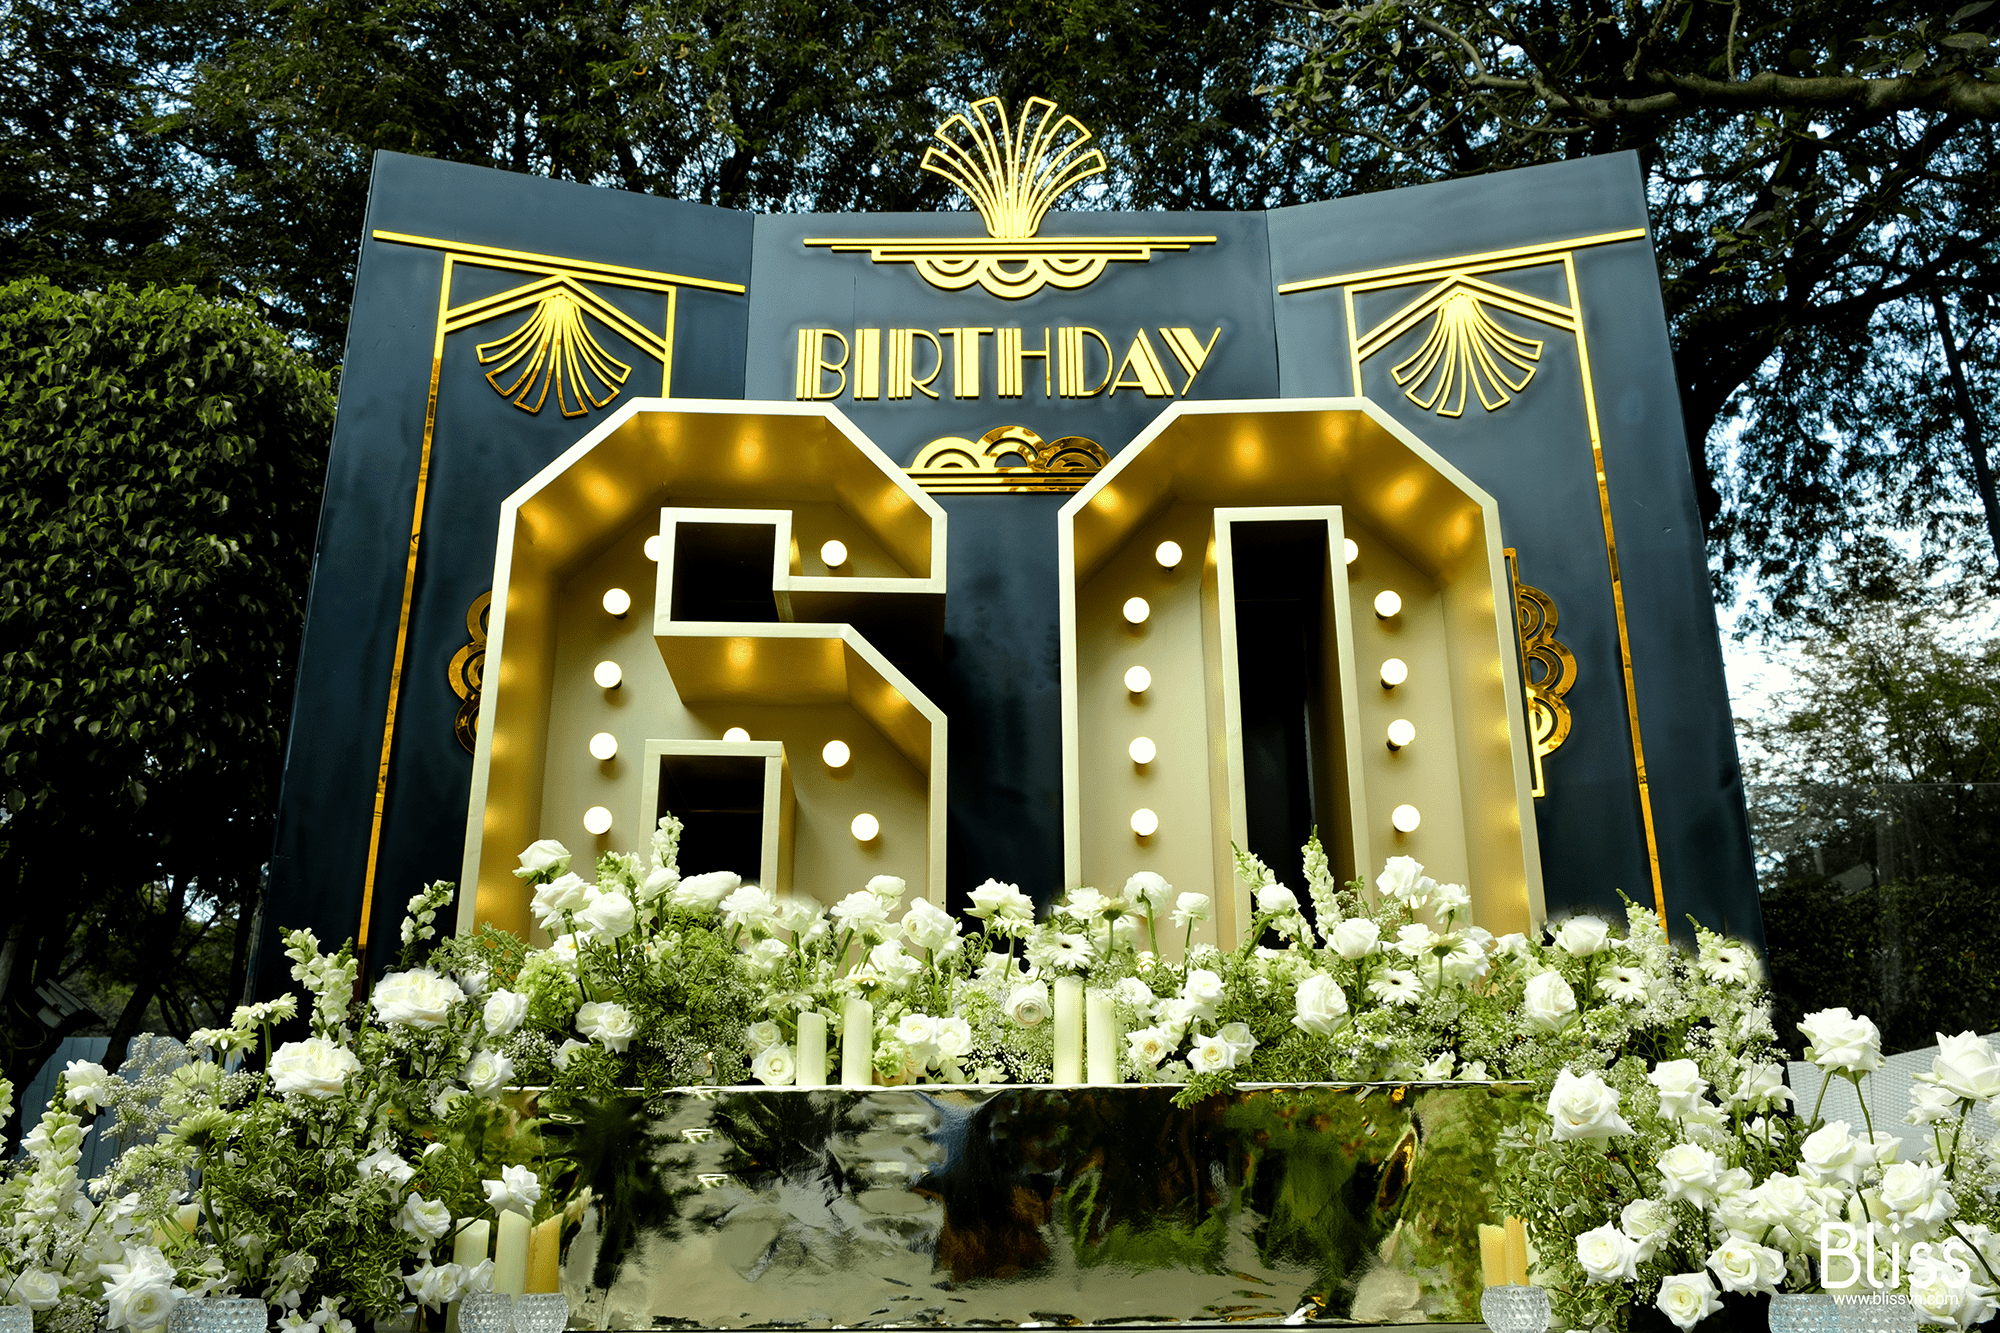 Plan a Memorable 60th birthday party decorations to Celebrate this Milestone Event